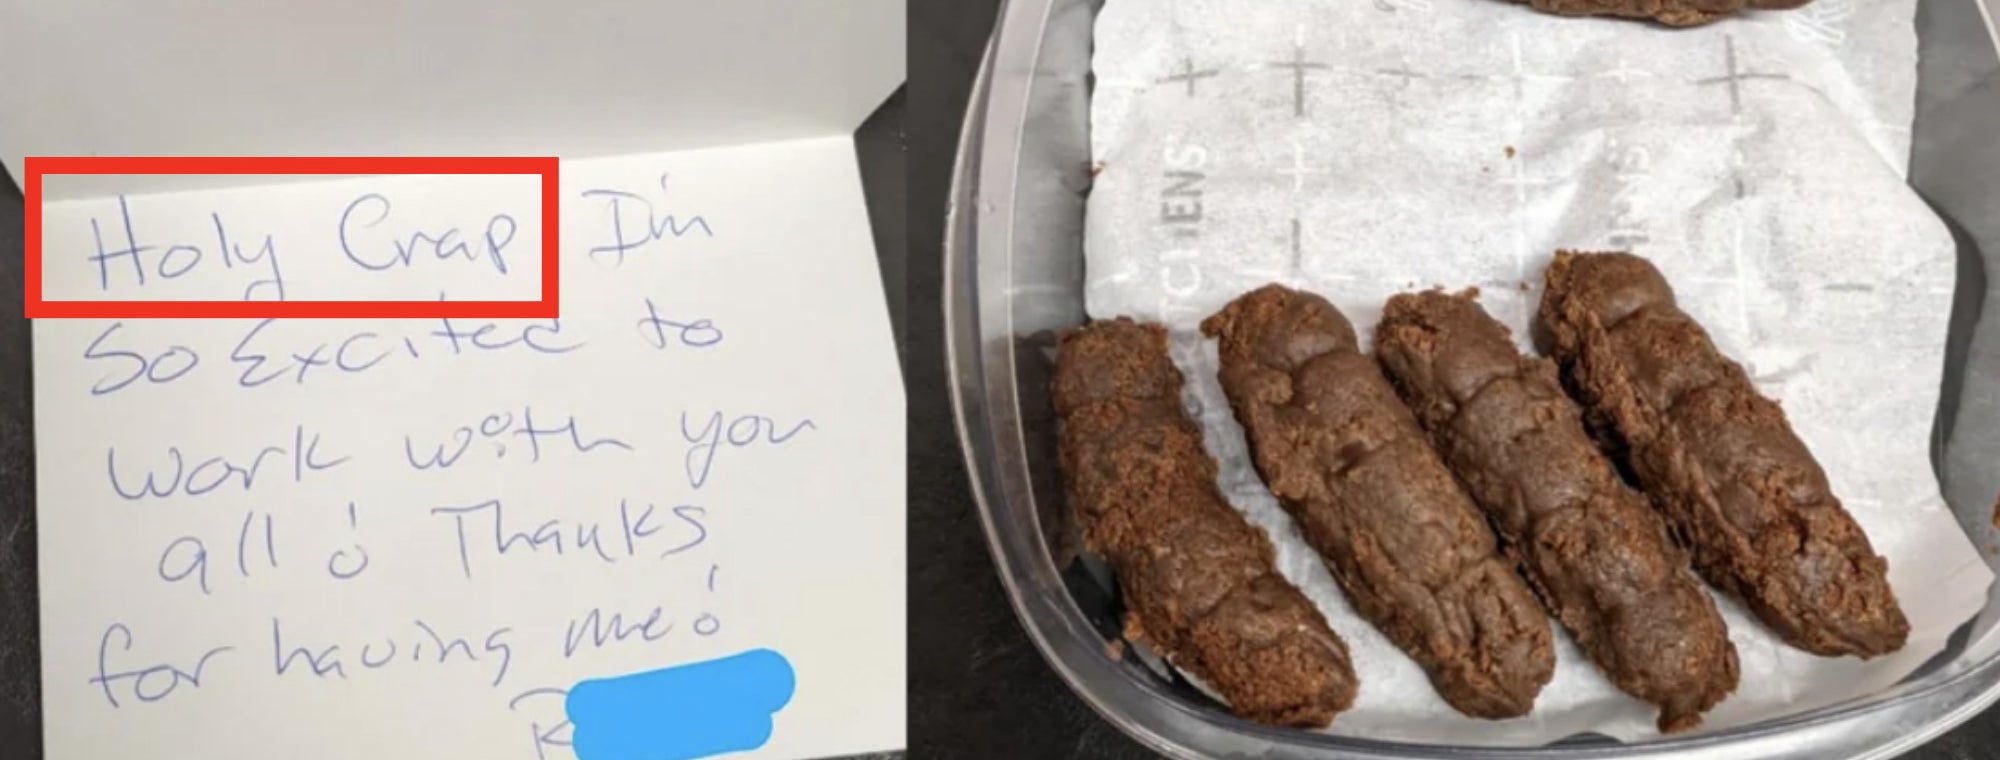 Four turd-looking brownies with handwritten note: &quot;Holy crap, I&#x27;m so excited to work with you all! Thanks for having me!&quot;